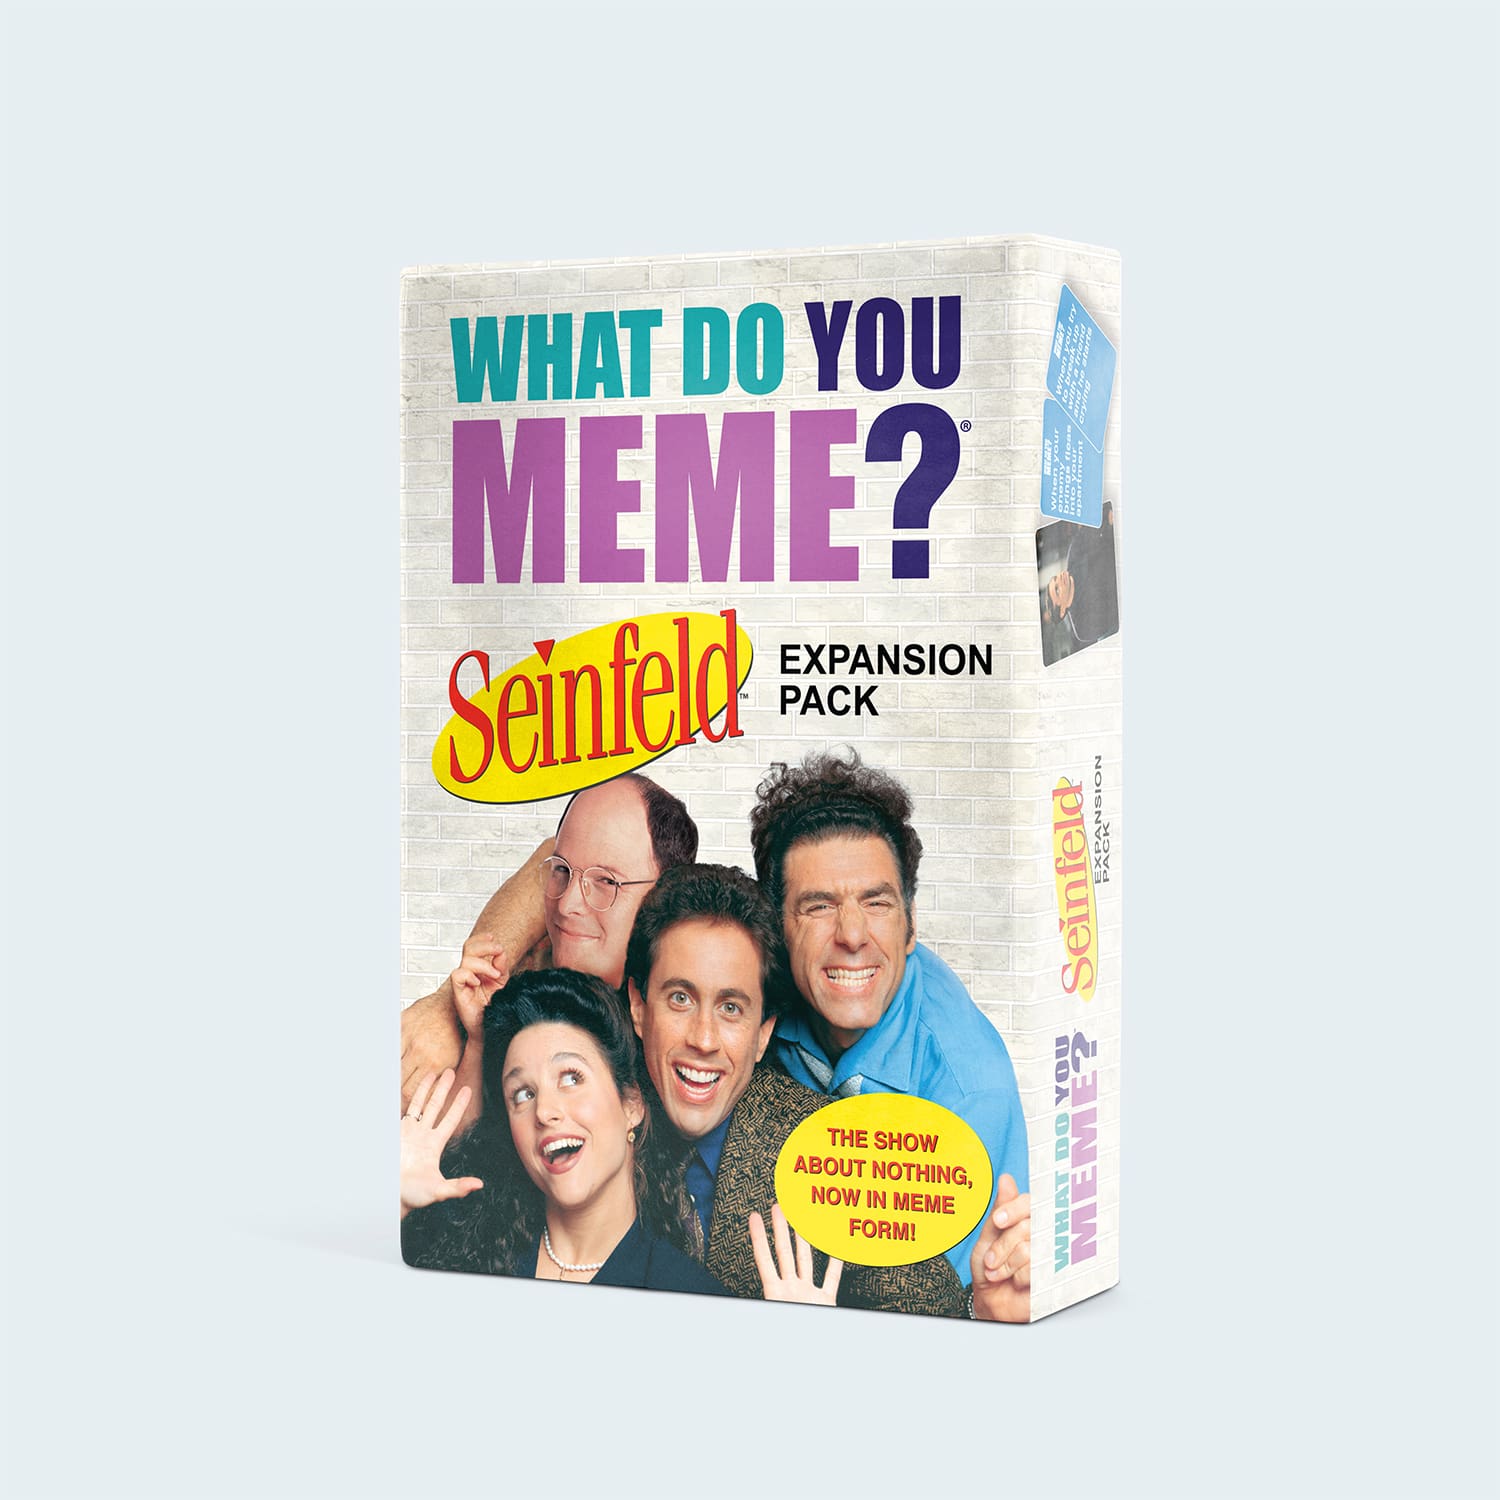 what-do-you-meme-seinfeld-expansion-pack-game-box-and-game-play-03-what-do-you-meme-by-relatable